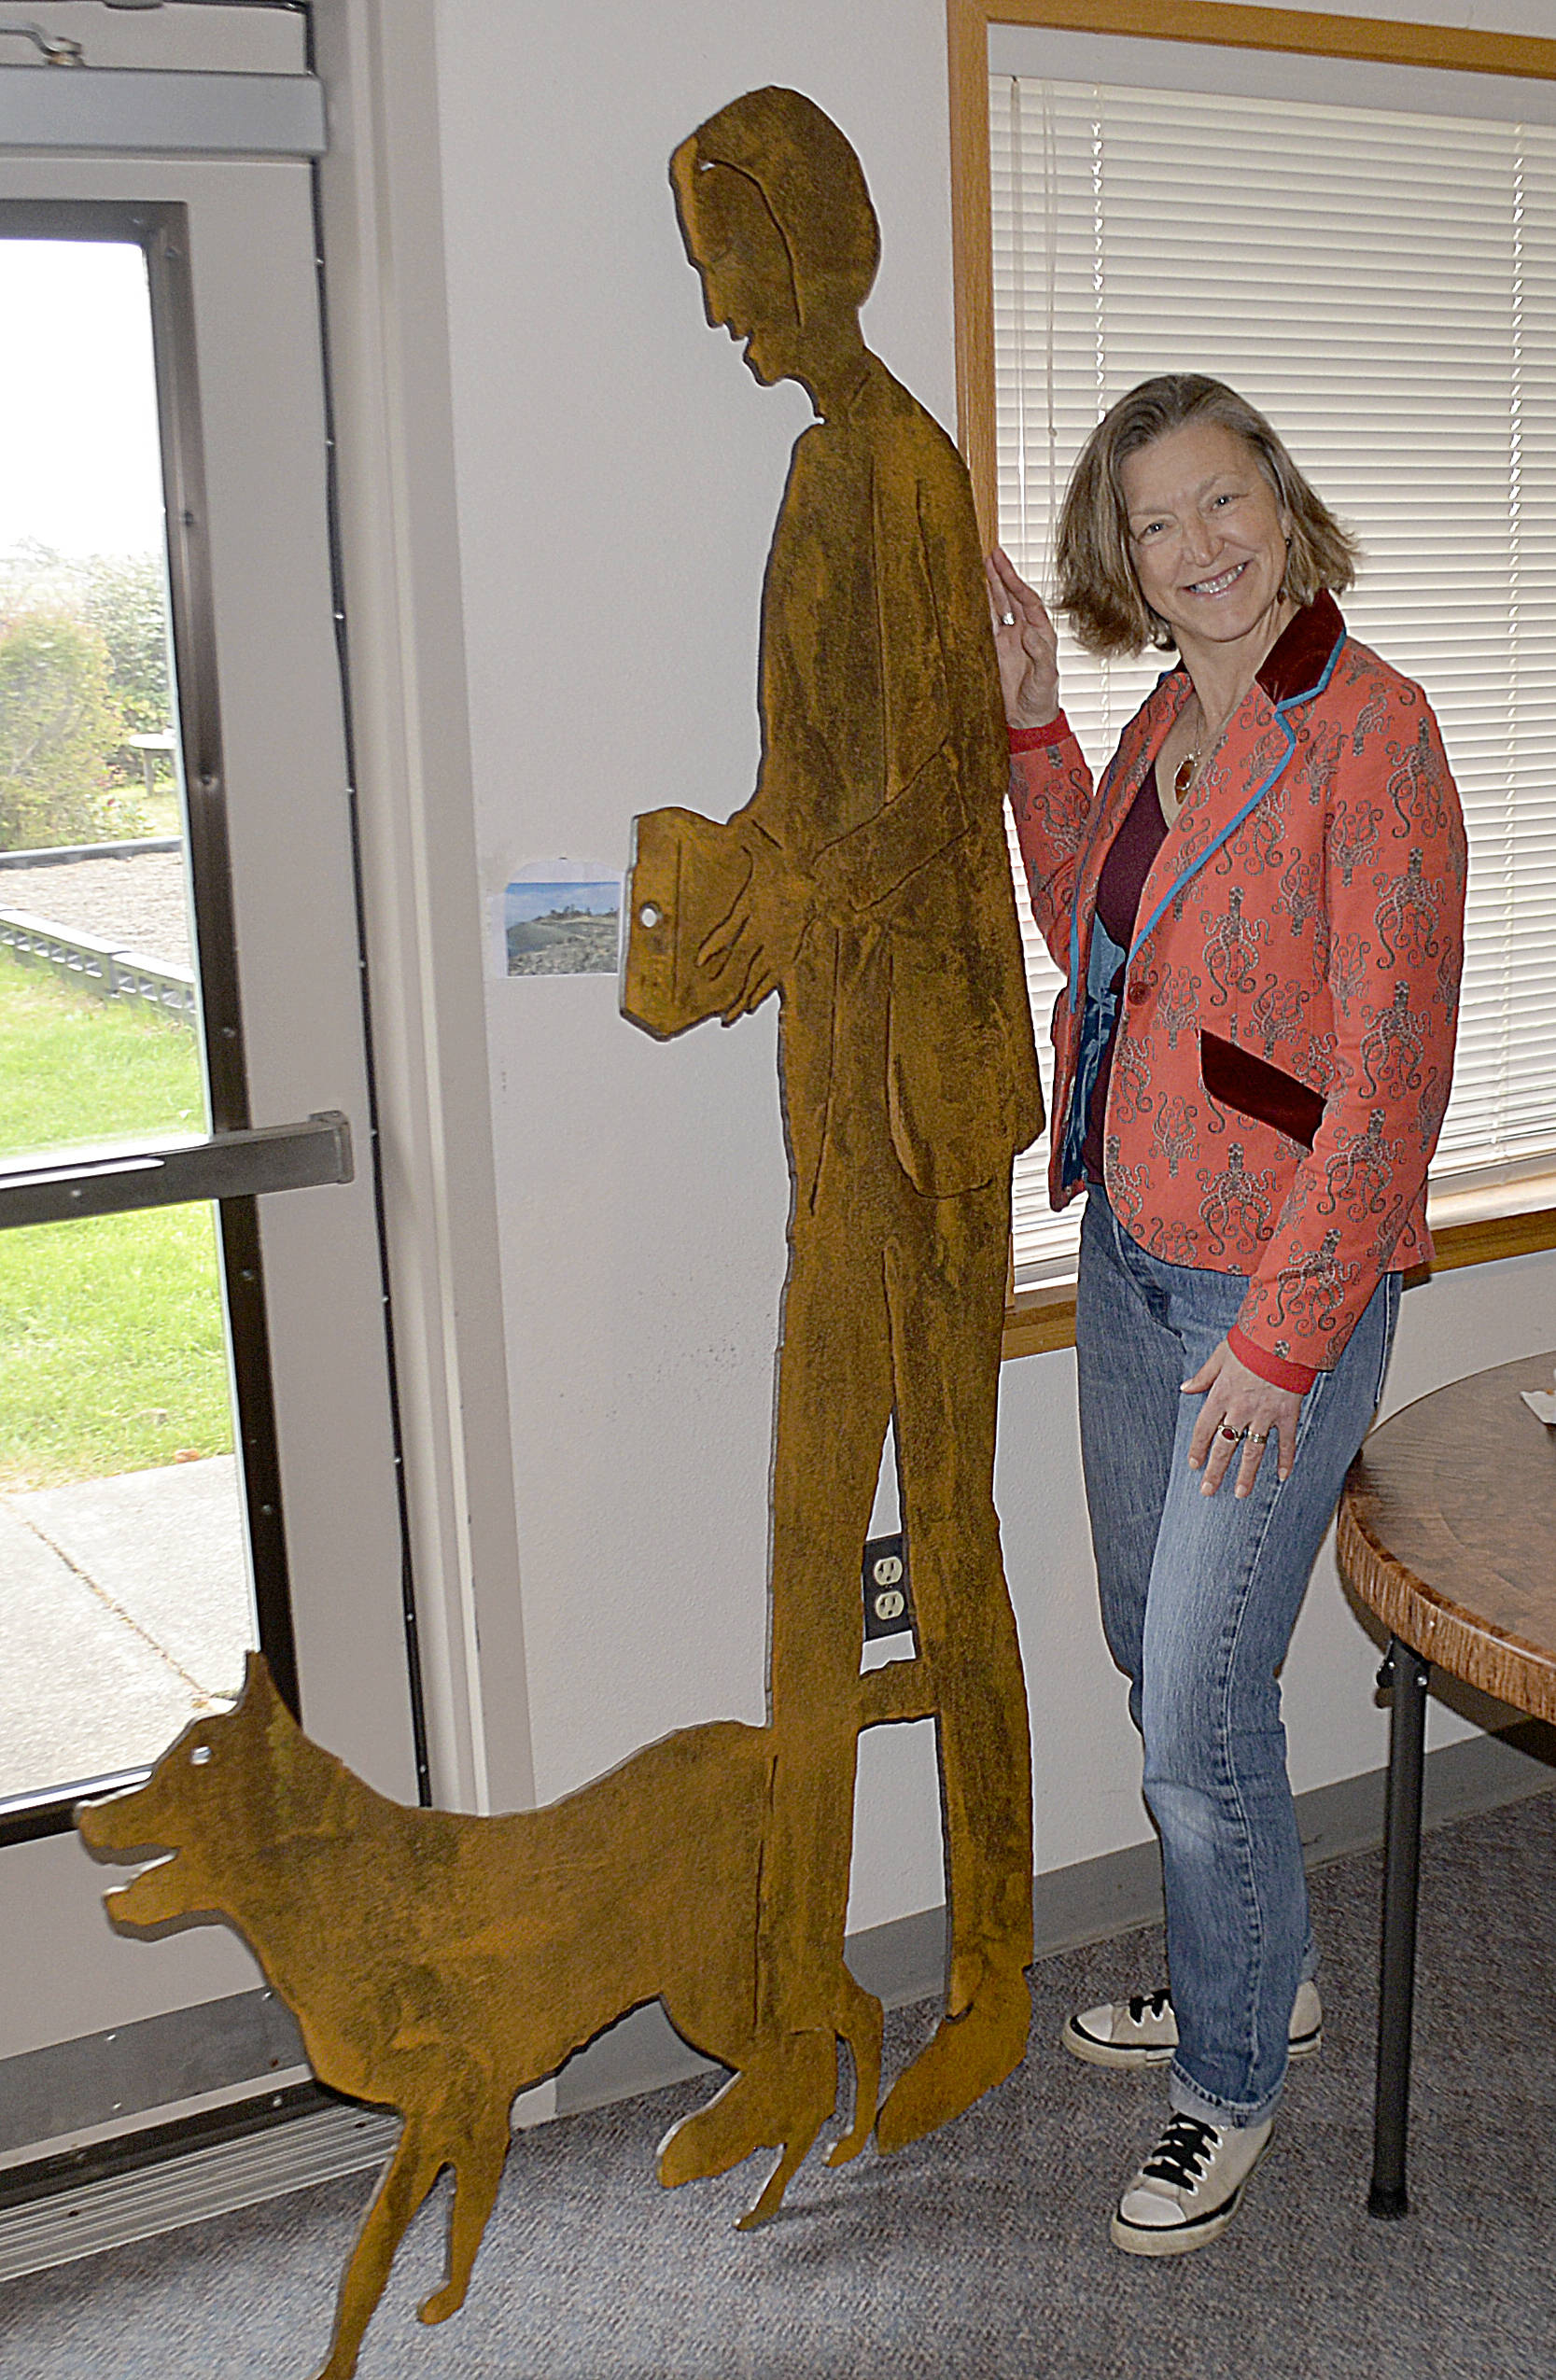 DAN HAMMOCK | GRAYS HARBOR NEWS GROUP                                North Cove resident Marcy Merill poses with a steel cutout she and her dog Hawkeye modeled for, part of the “Shape the Shore” project. The iron silhouette was made by local artist John Jones and will be placed at the revetment project at the end of Old State Route 105. The box camera she is holding in the piece includes a hole that will point visiting photographers to a specific spot in the revetment to take a picture. Those photos can be used to help track the movement of the rock in the revetment.